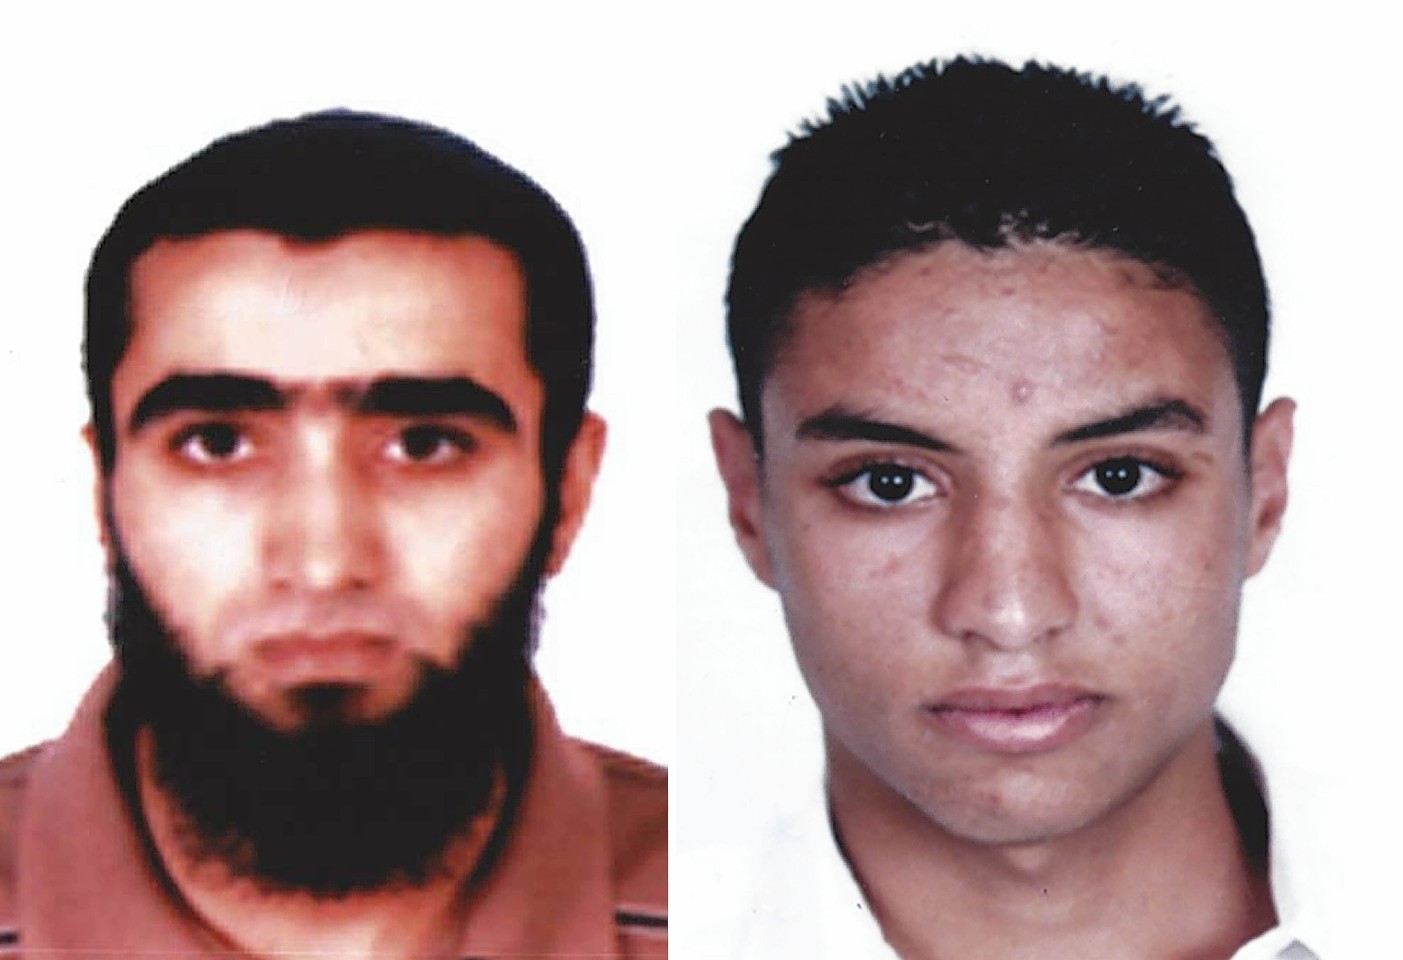 Bin Abdallah (left) and Rafkhe Talari, 
who are being sought by Tunisian authorities in connection with the terror attack in Sousse